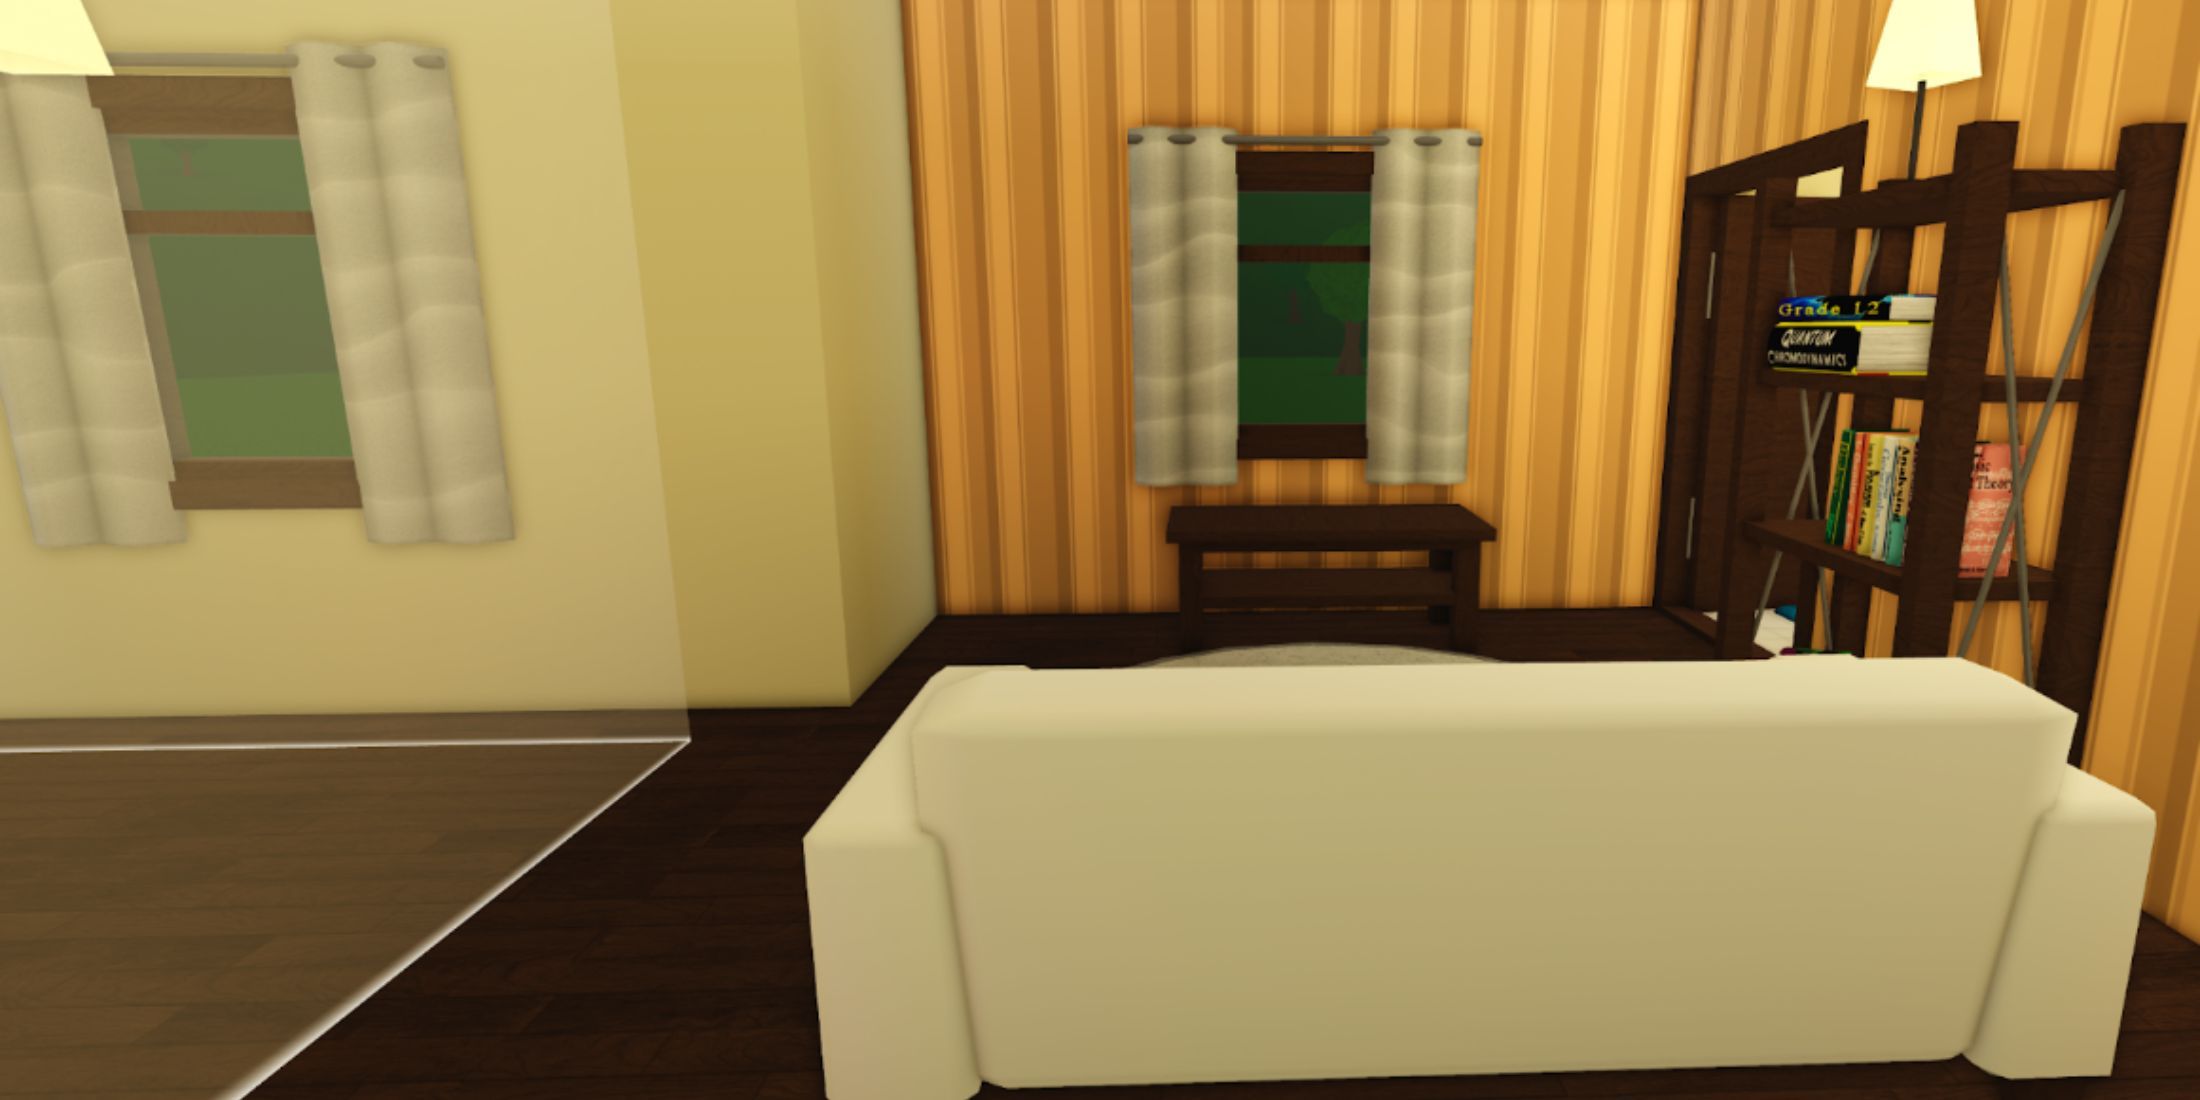 House in Welcome to Bloxburg